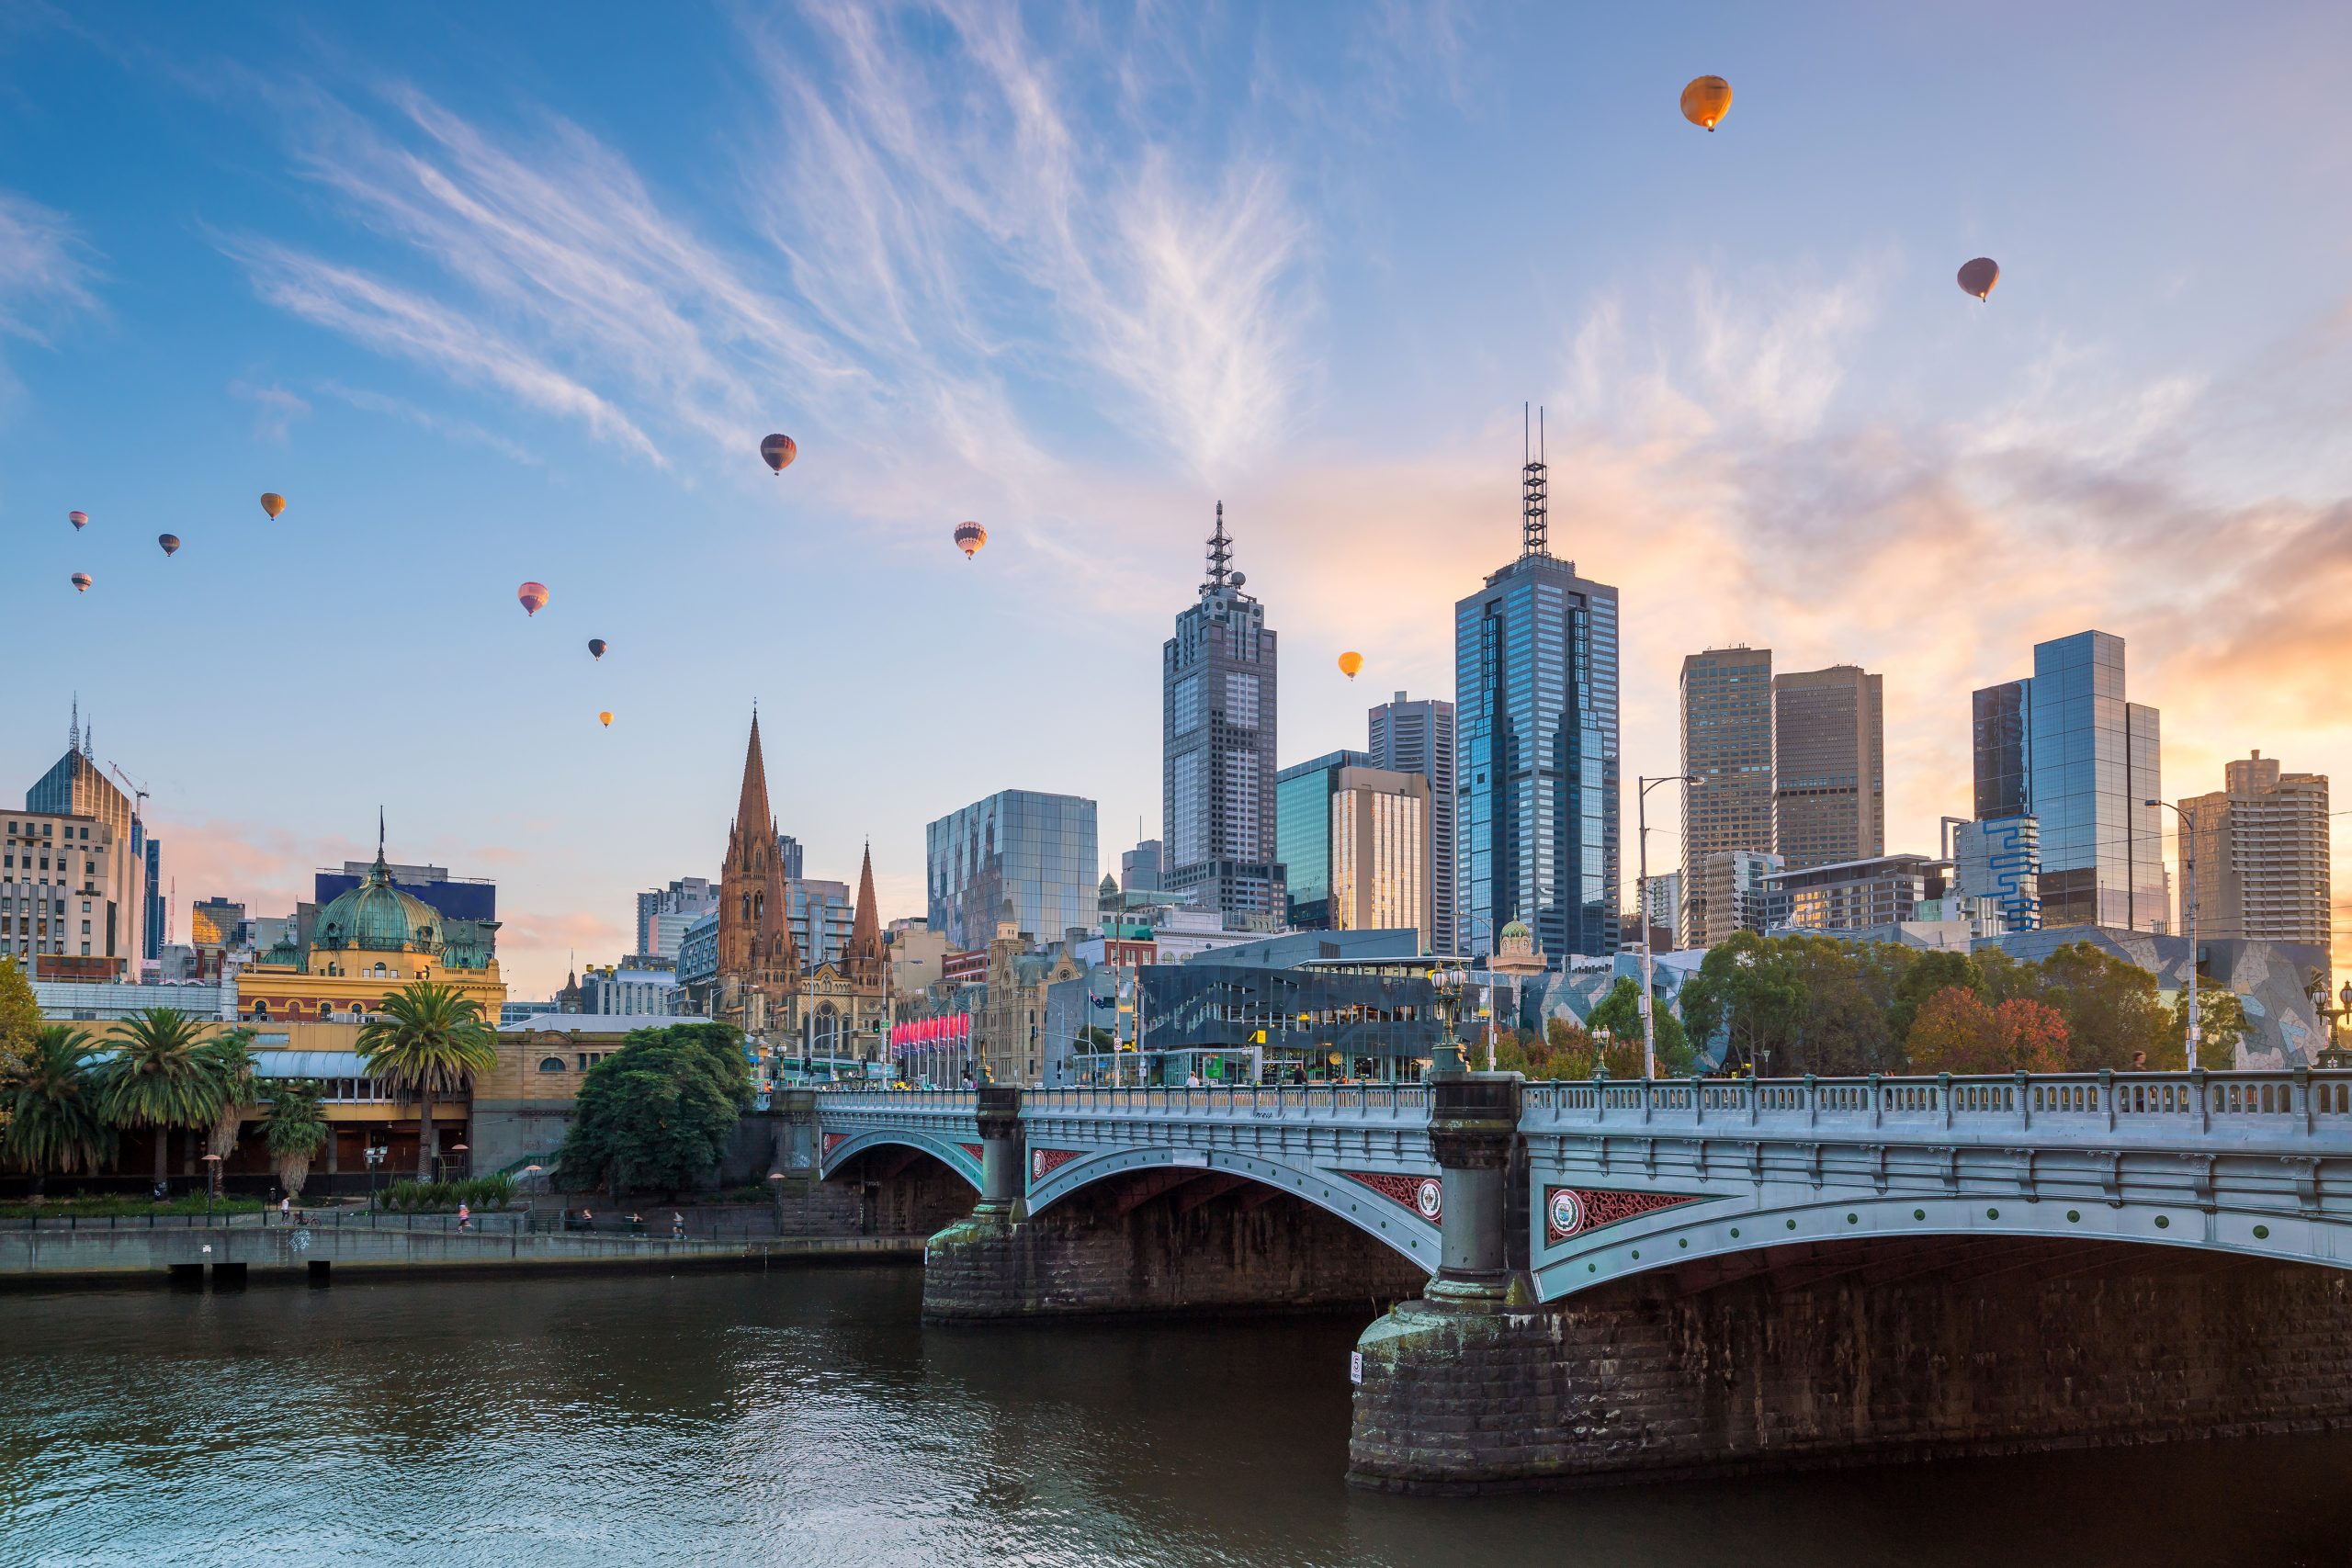 Hot Air Balloons over the Melbourne city skyline at twilight in Australia.